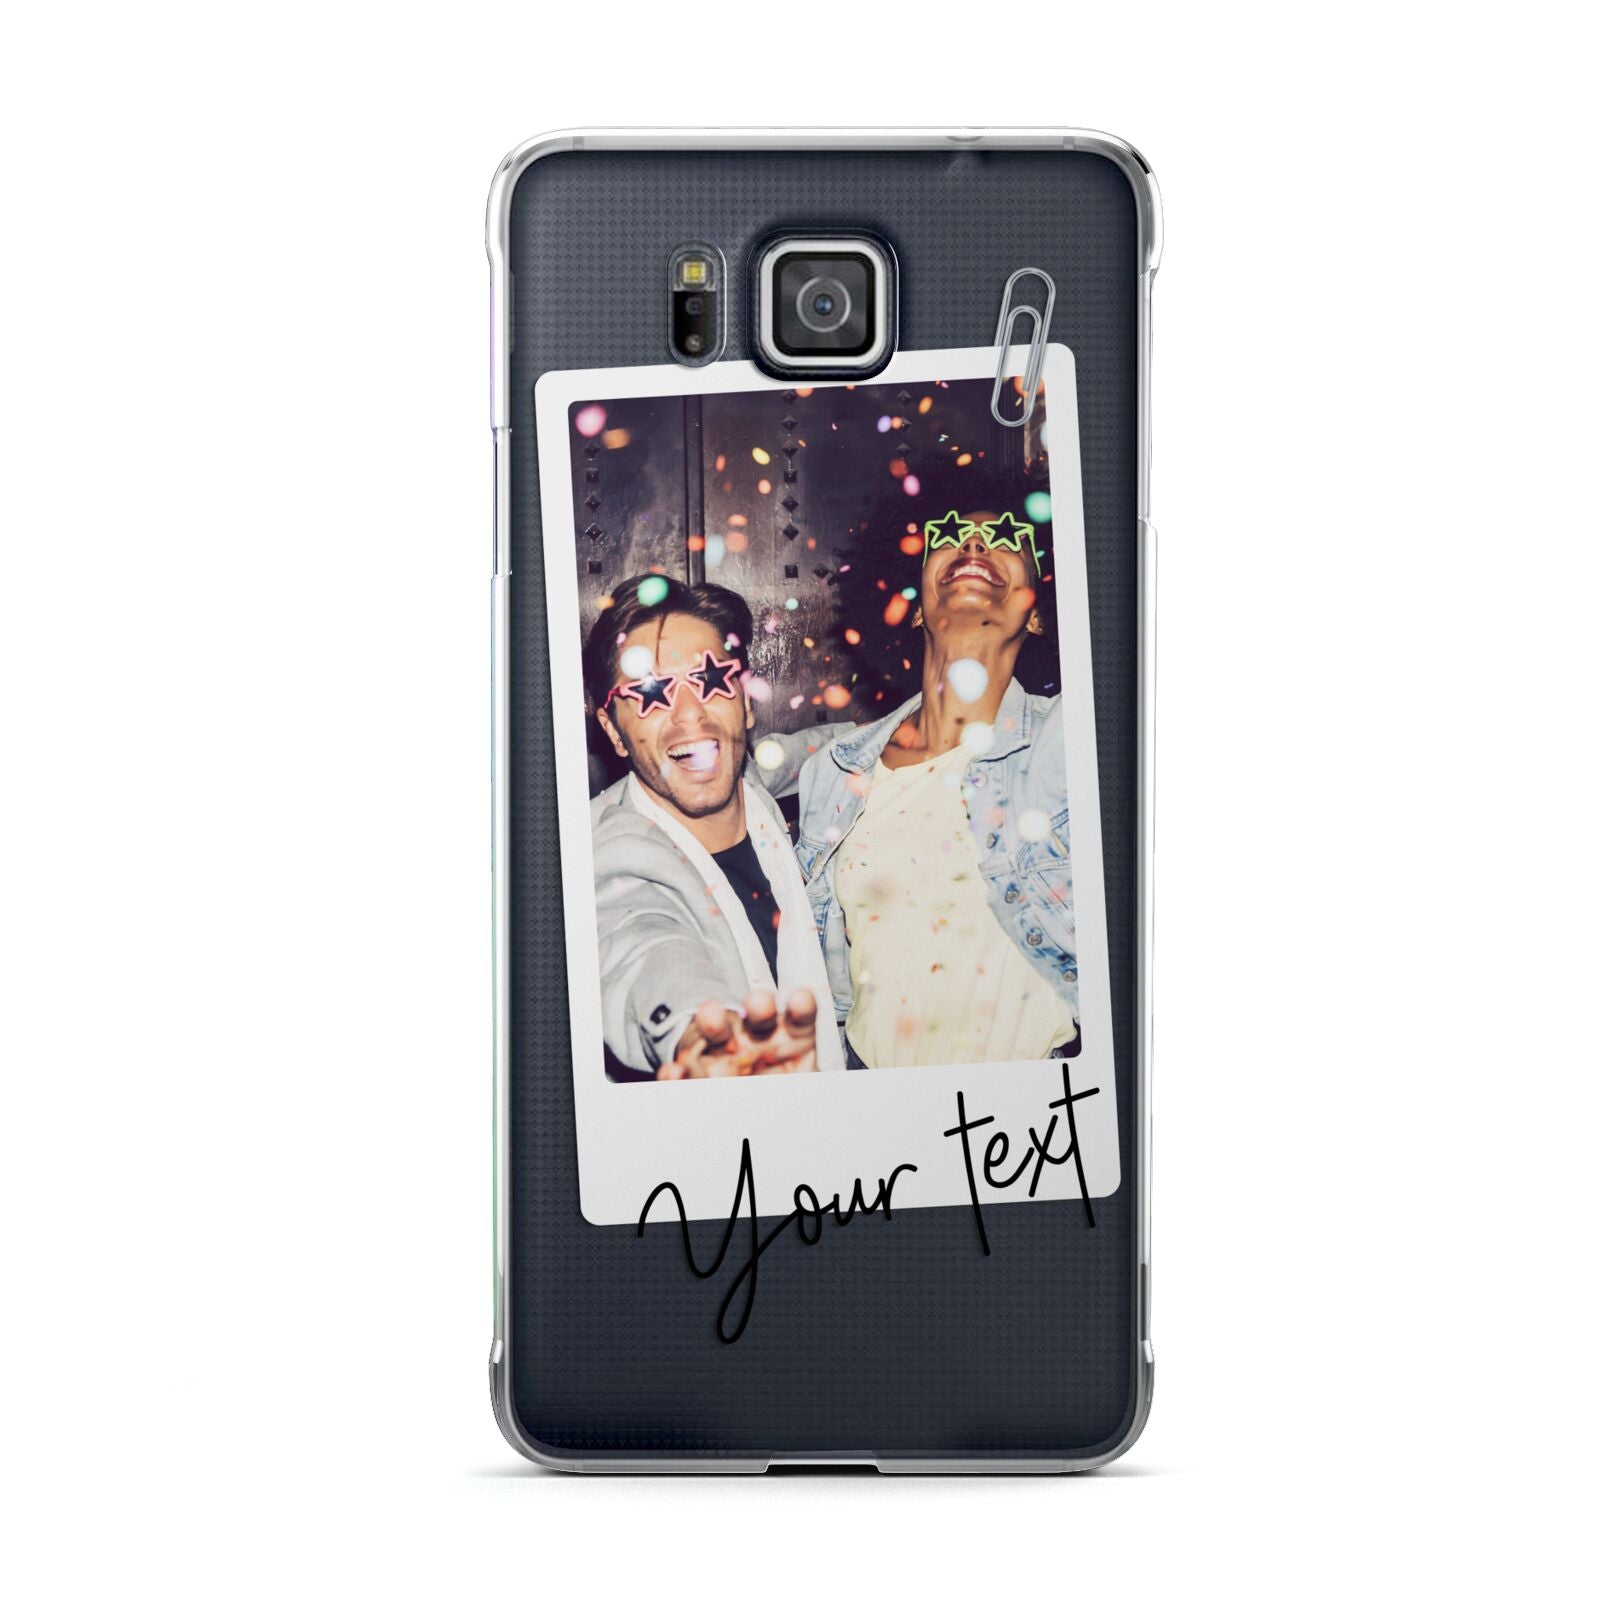 Personalised Photo with Text Samsung Galaxy Alpha Case